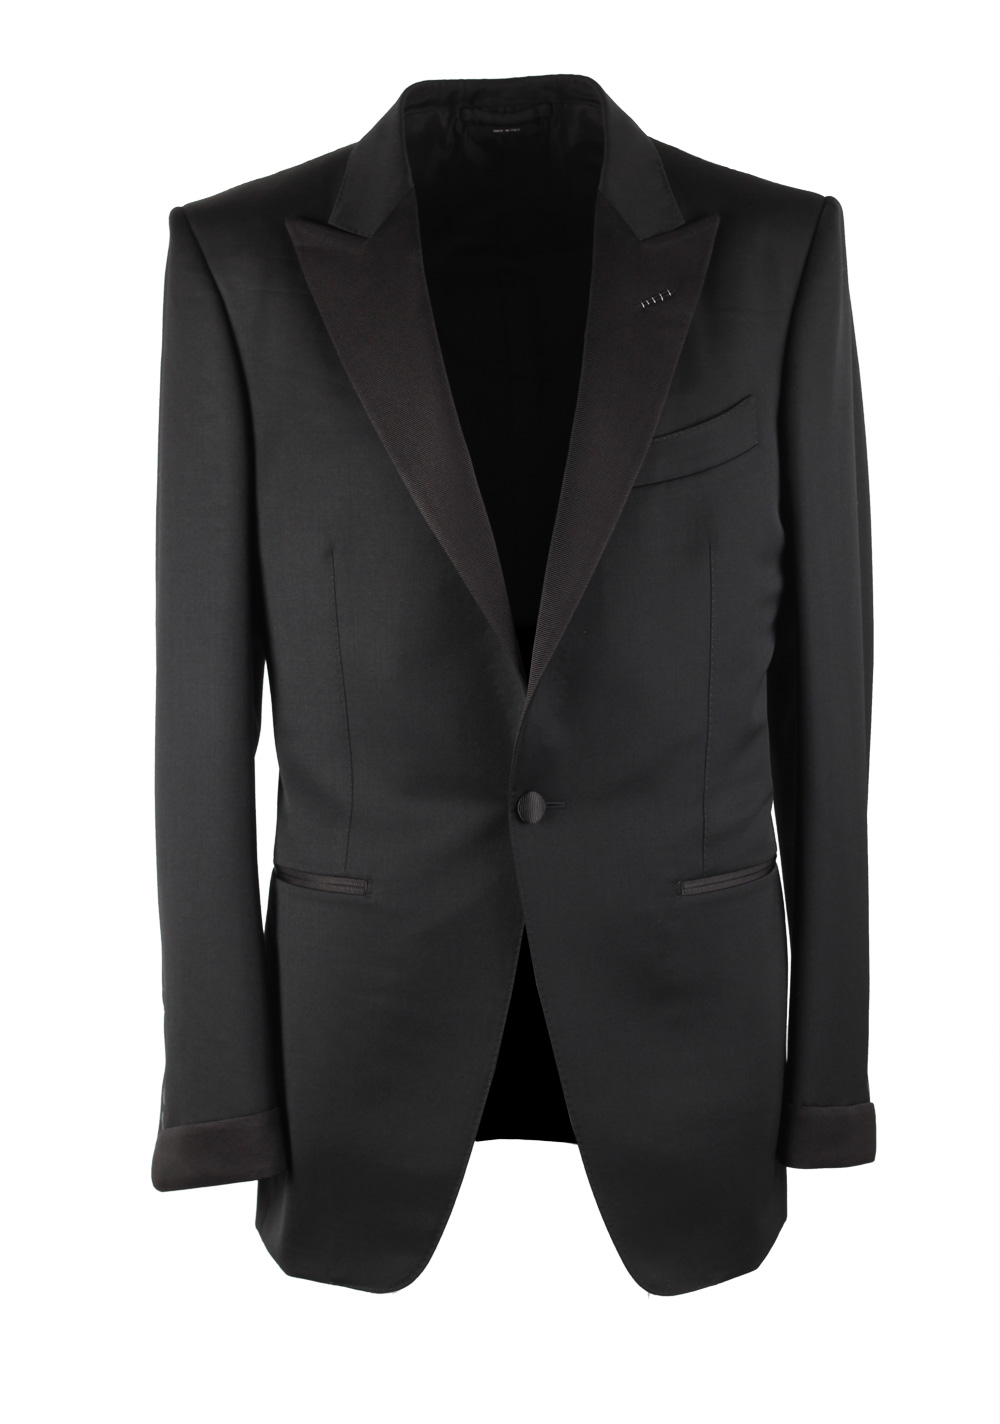 TOM FORD O’Connor Black Tuxedo Suit Smoking Size 48 / 38R U.S. Fit Y ...